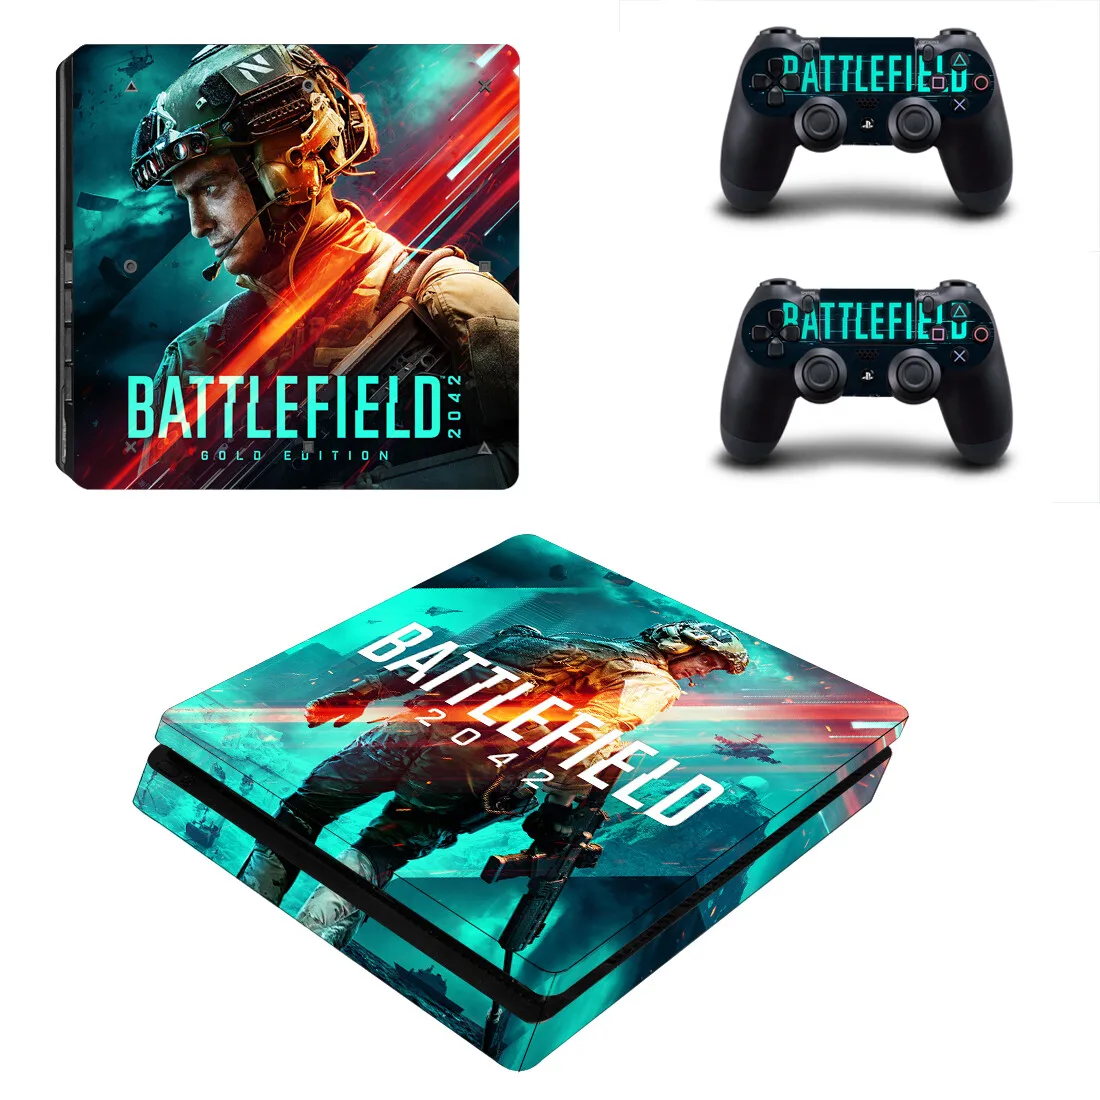 

Battlefield 2042 PS4 Slim Skin Sticker For Sony PlayStation 4 Console and Controllers PS4 Slim Skins Sticker Decal Vinyl